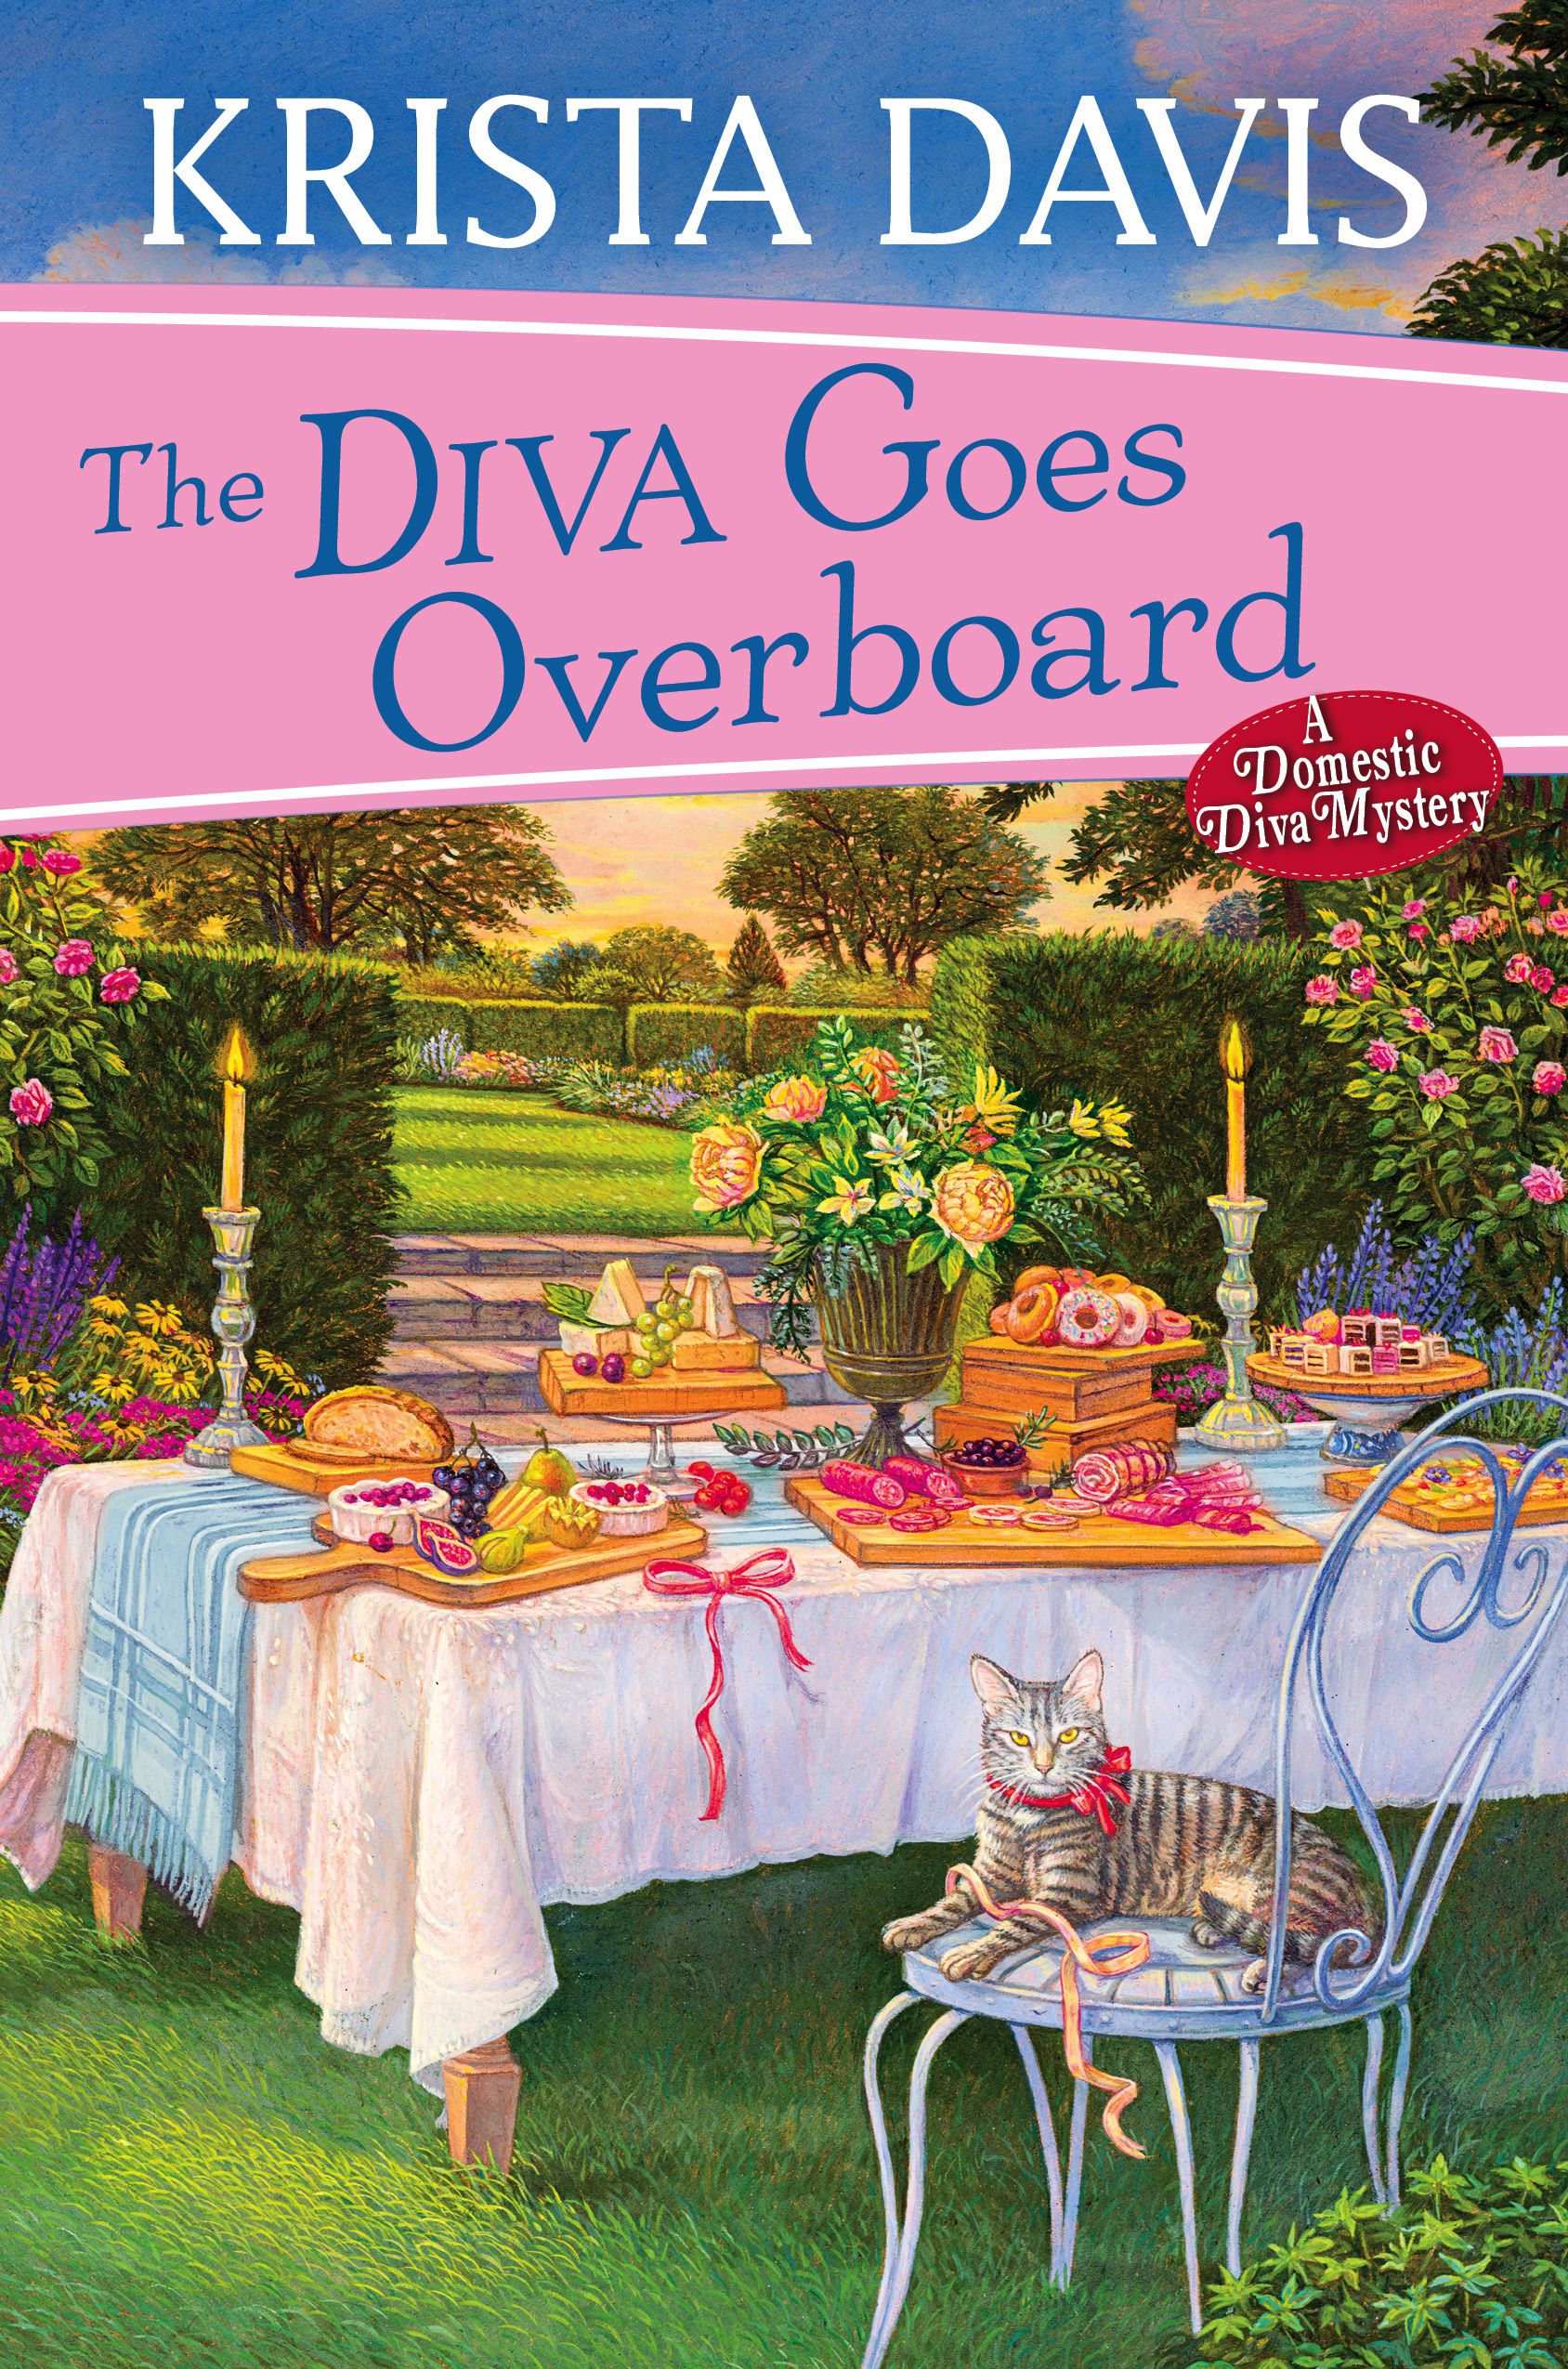 Book cover showing a beautiful table in a colordful garden. Charcuterie boards with cheeses and meats are on the table along with butter boards, breads and sweets.